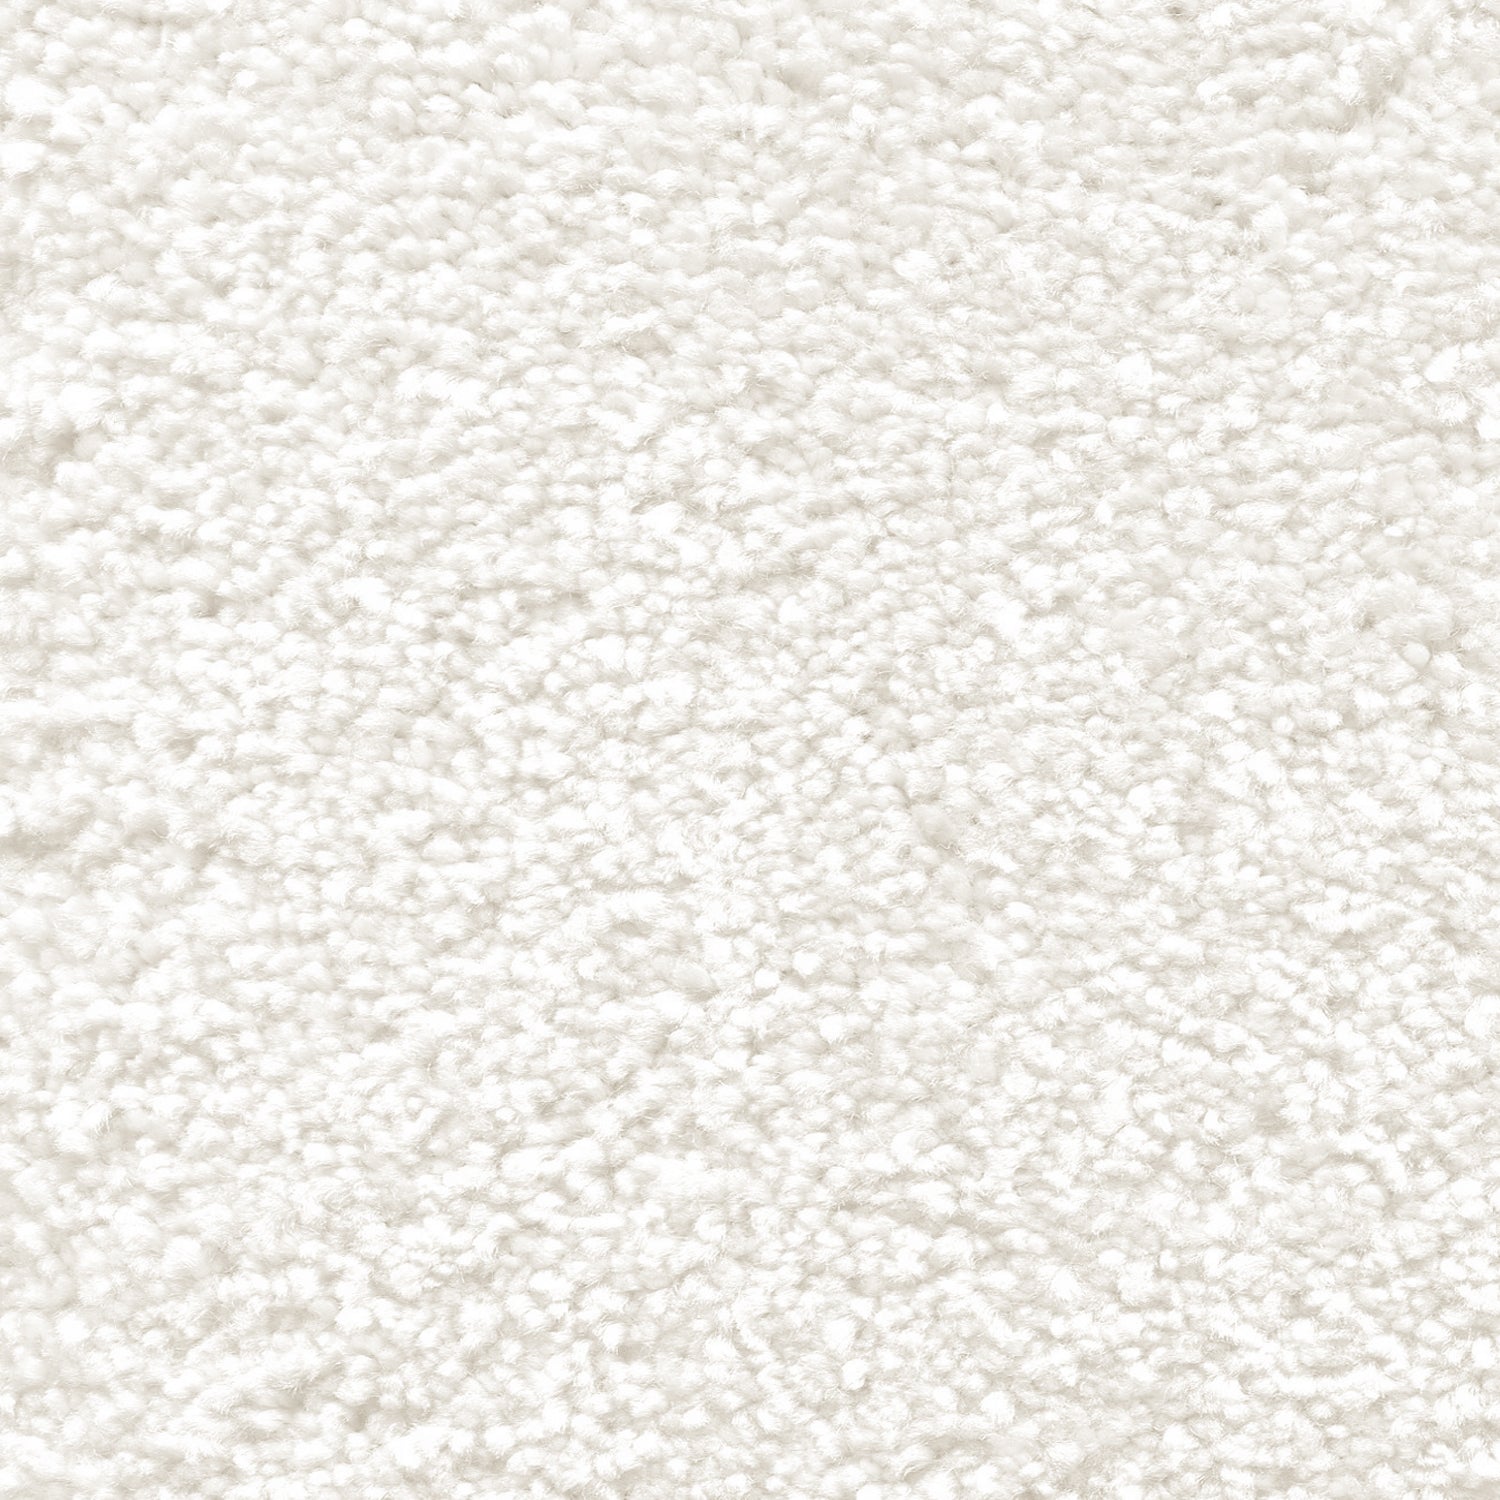 Nylon broadloom carpet swatch in a cut pile texture in white.